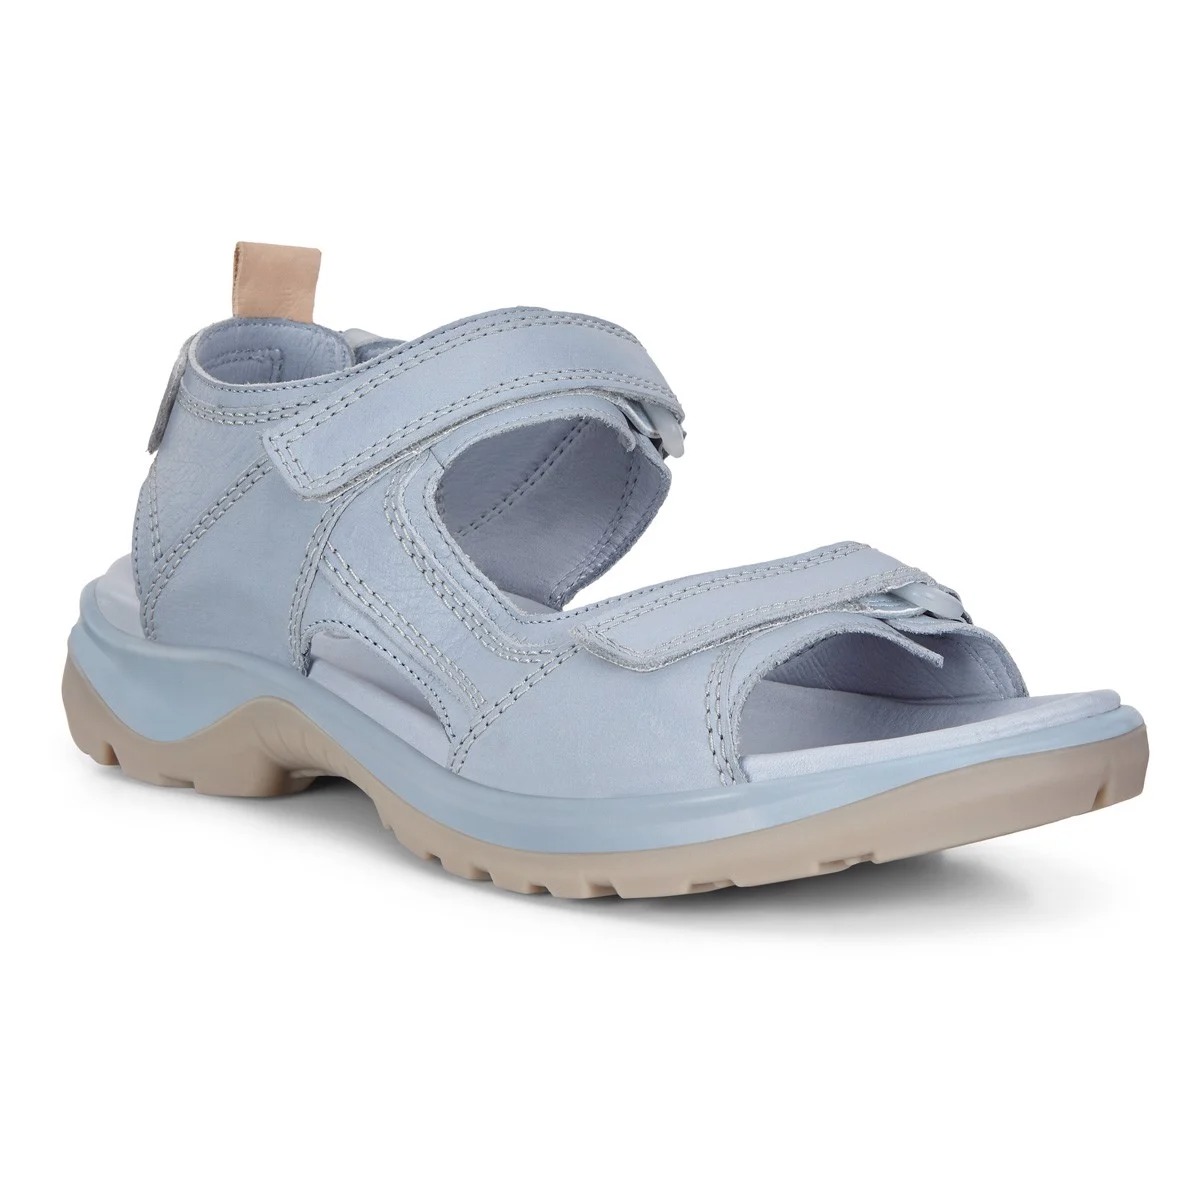 GIÀY SANDALS ECCO NỮ OFFROAD W 82210301434